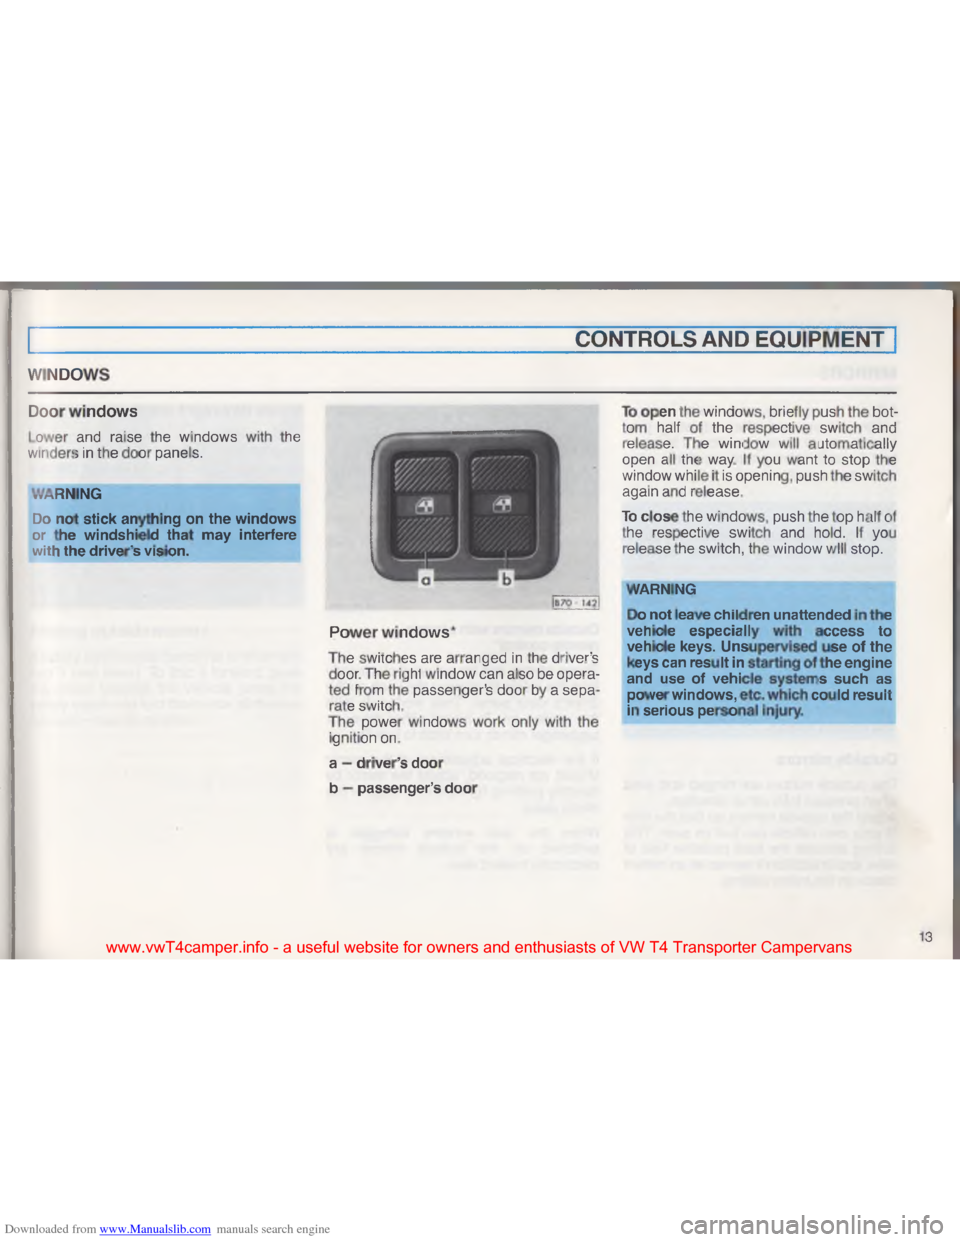 VOLKSWAGEN TRANSPORTER 1993 T4 / 4.G User Guide Downloaded from www.Manualslib.com manuals search engine "
\016 *
$
\036 :
\036
\003
#;
\036
/
A
;
"
" ;
$
\007
A
;
"
" \007
,
" \017 "
"
0
K
" \036
#
\007
#
"
" \023
\004 l:7
\036
\036 :
X
\036 :
#
